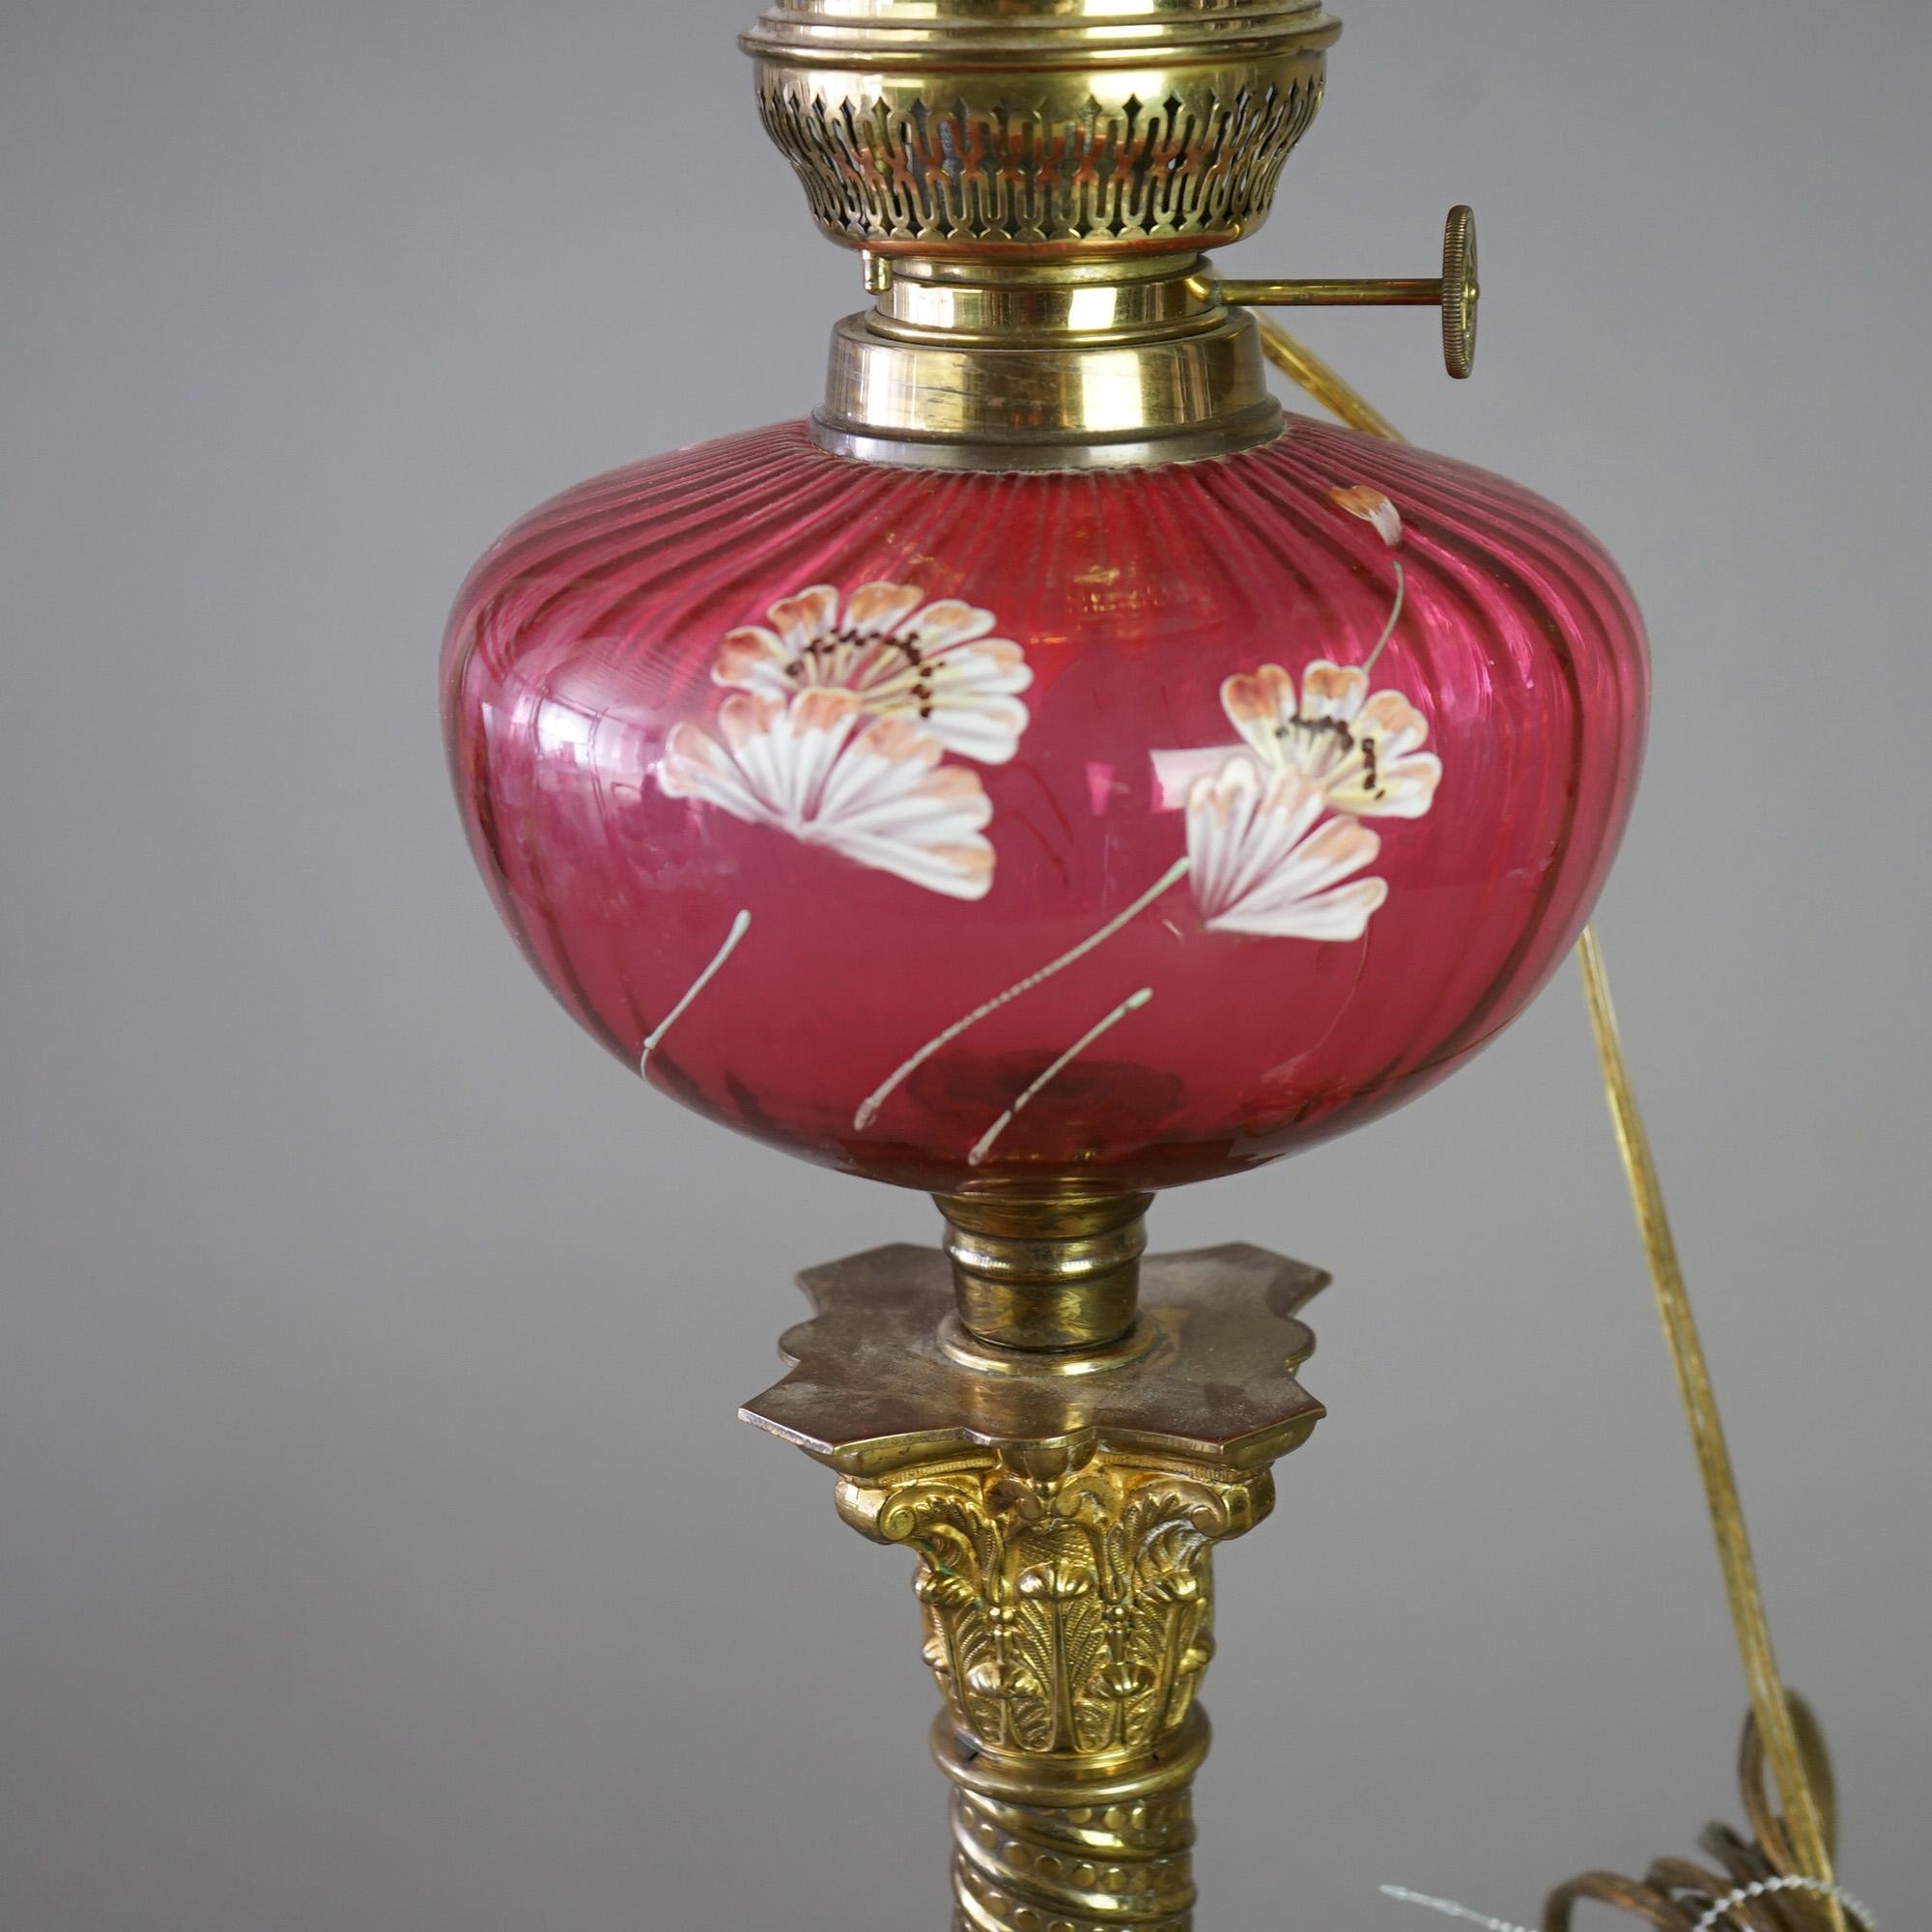 An antique Victorian banquet lamp offers cranberry glass ruffle rim shade over base having matching glass font with hand painted flowers, raised on brass Corinthian form column, electrified, C1890

Measures - 30.25